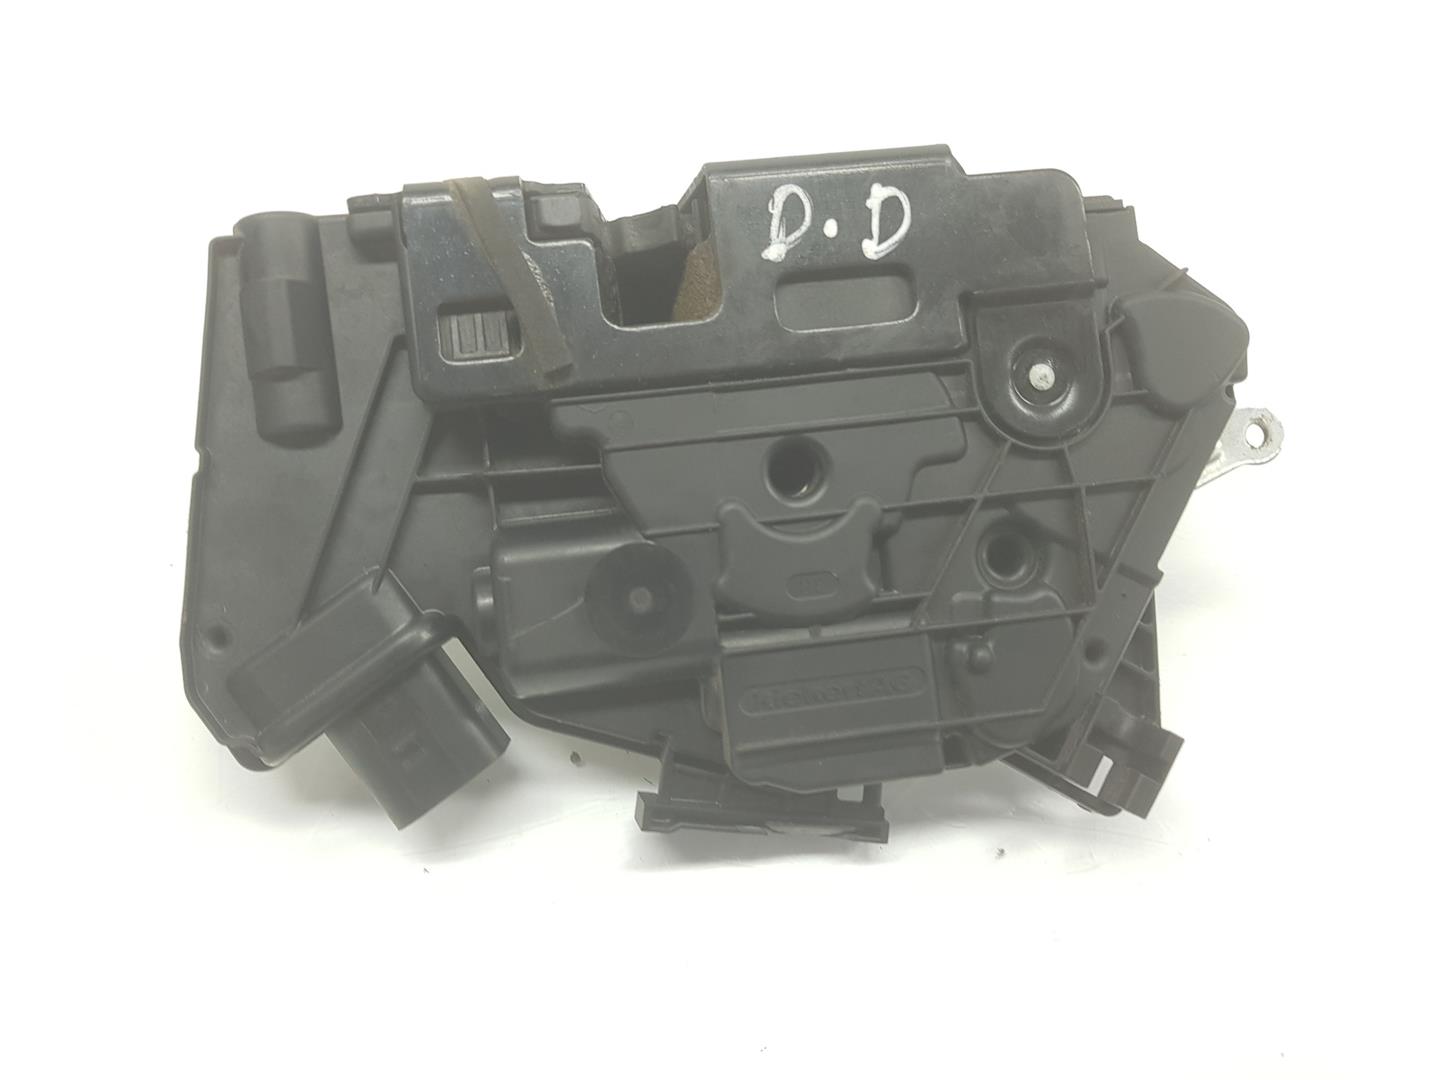 SEAT Ibiza 4 generation (2008-2017) Front Right Door Lock 5N1837016A, 5N1837016A 19781717